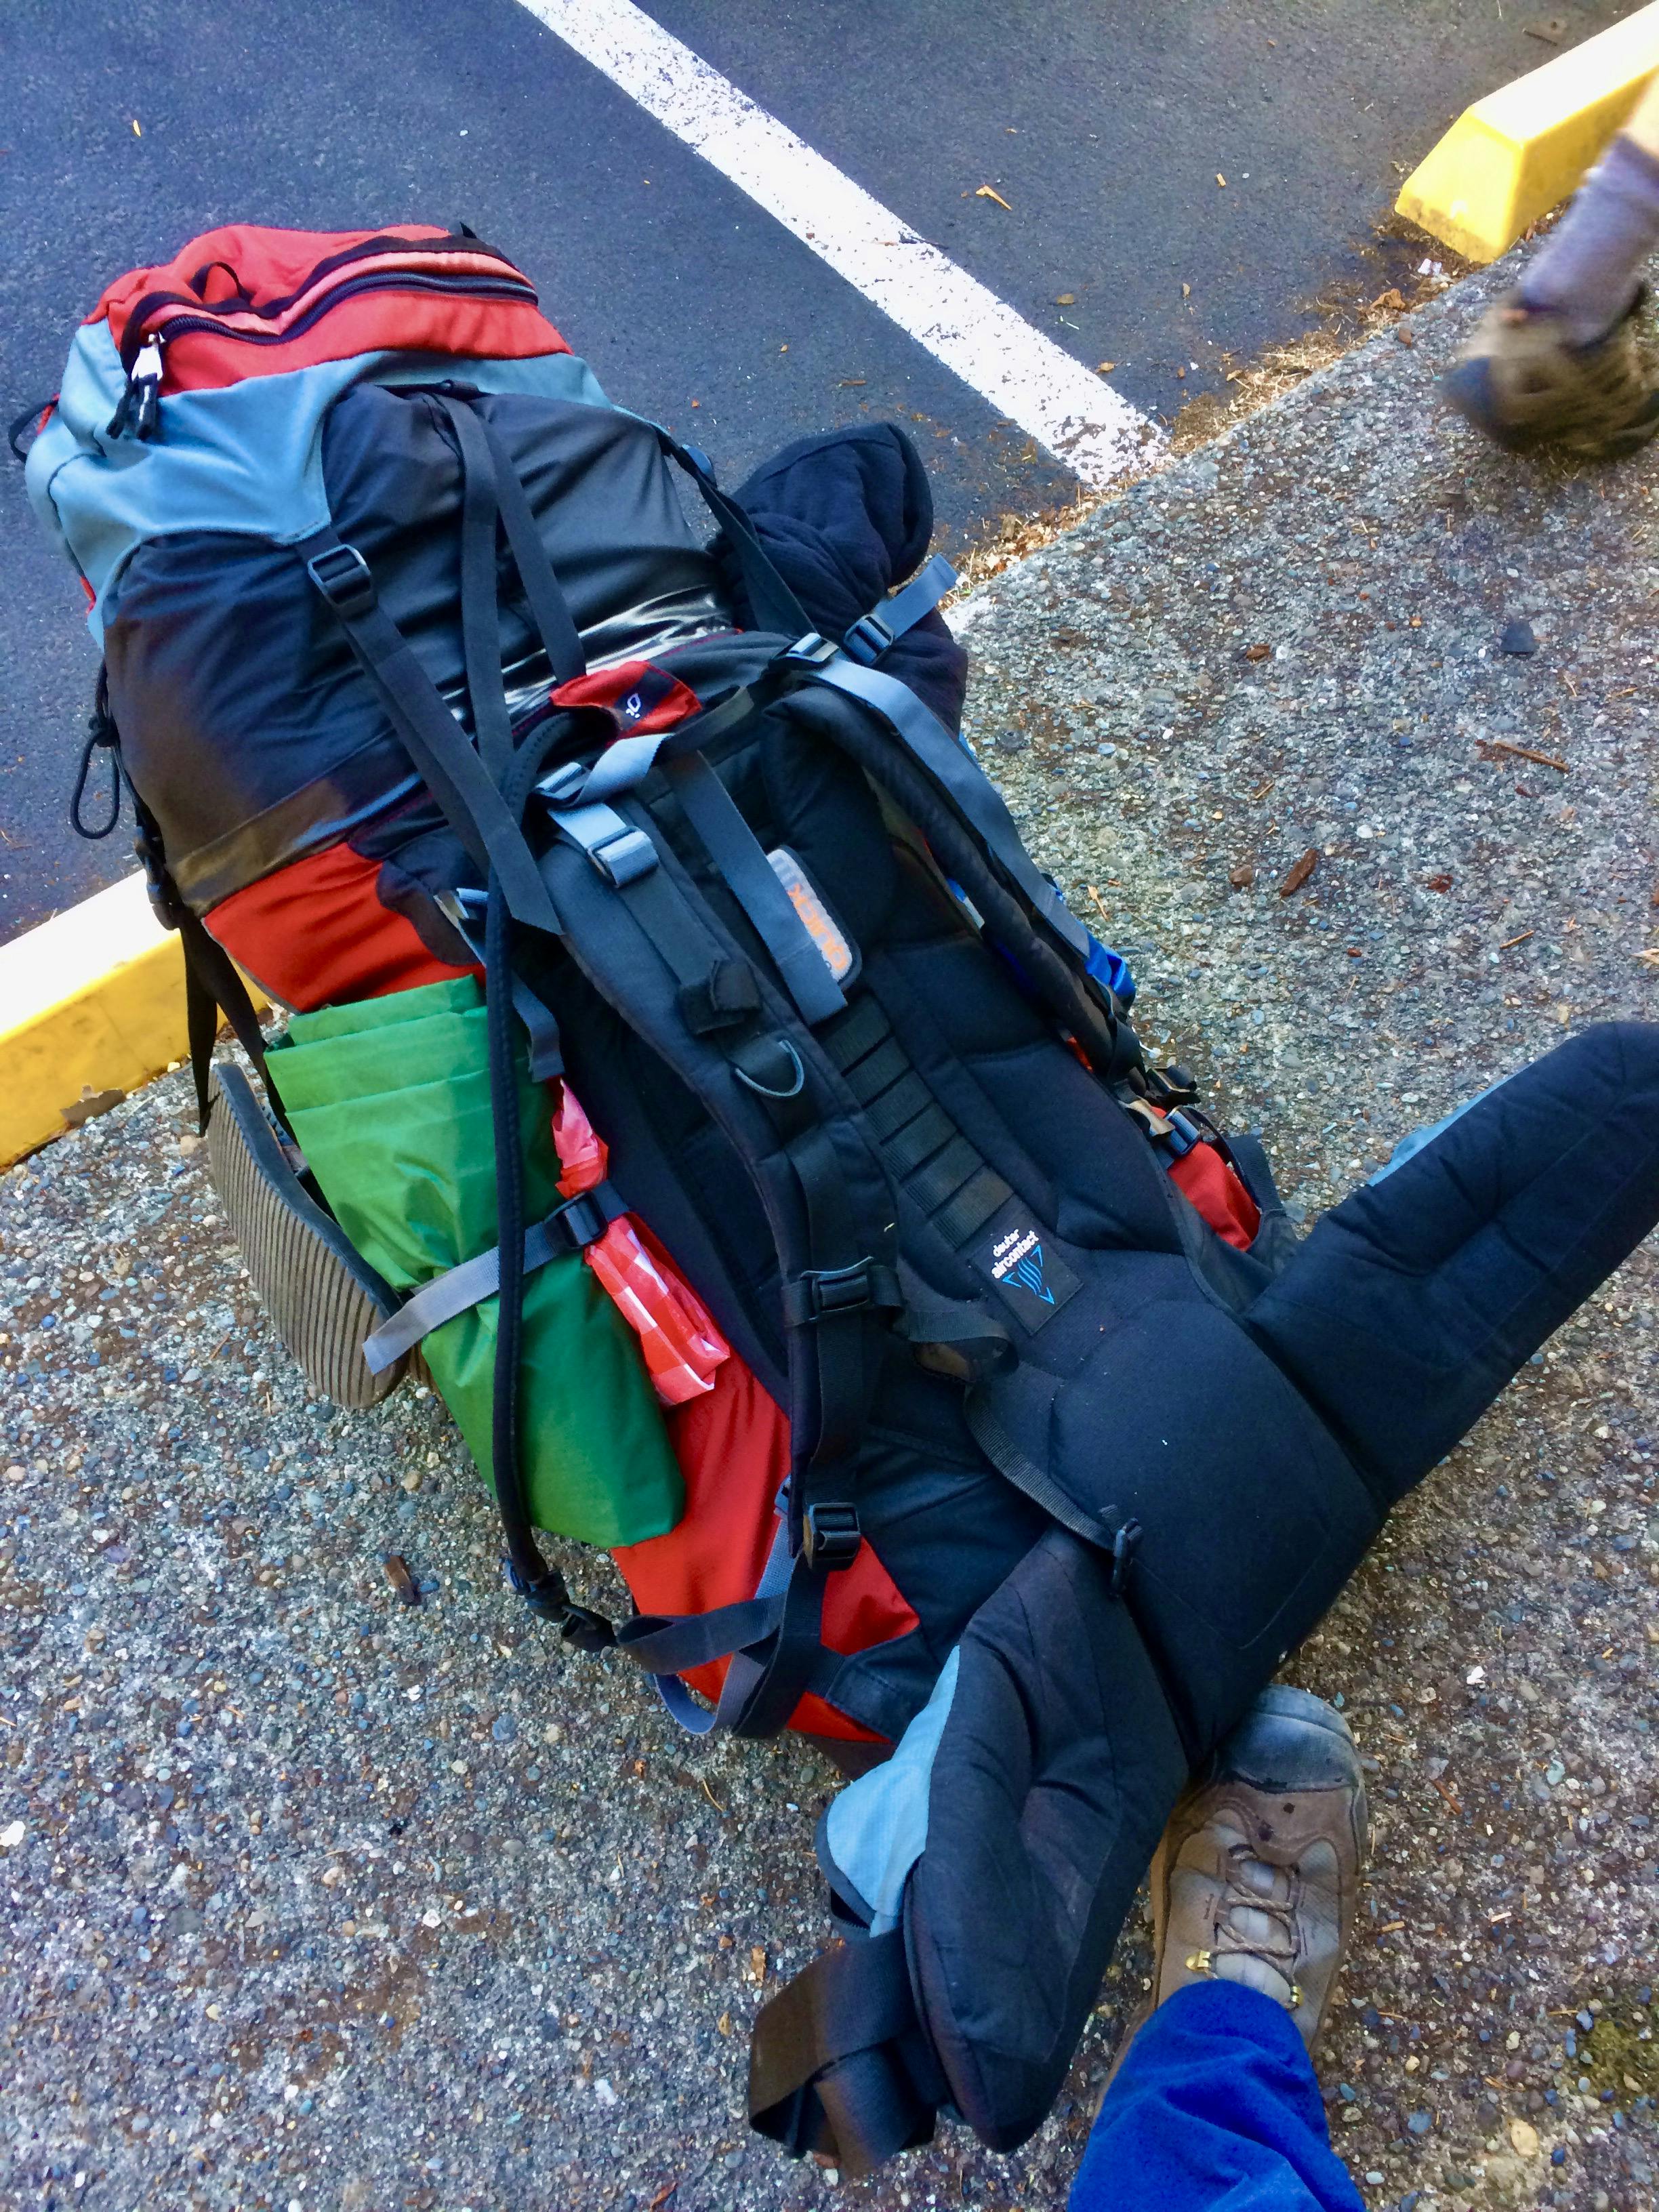 Loaded backpacking backpack on the ground.